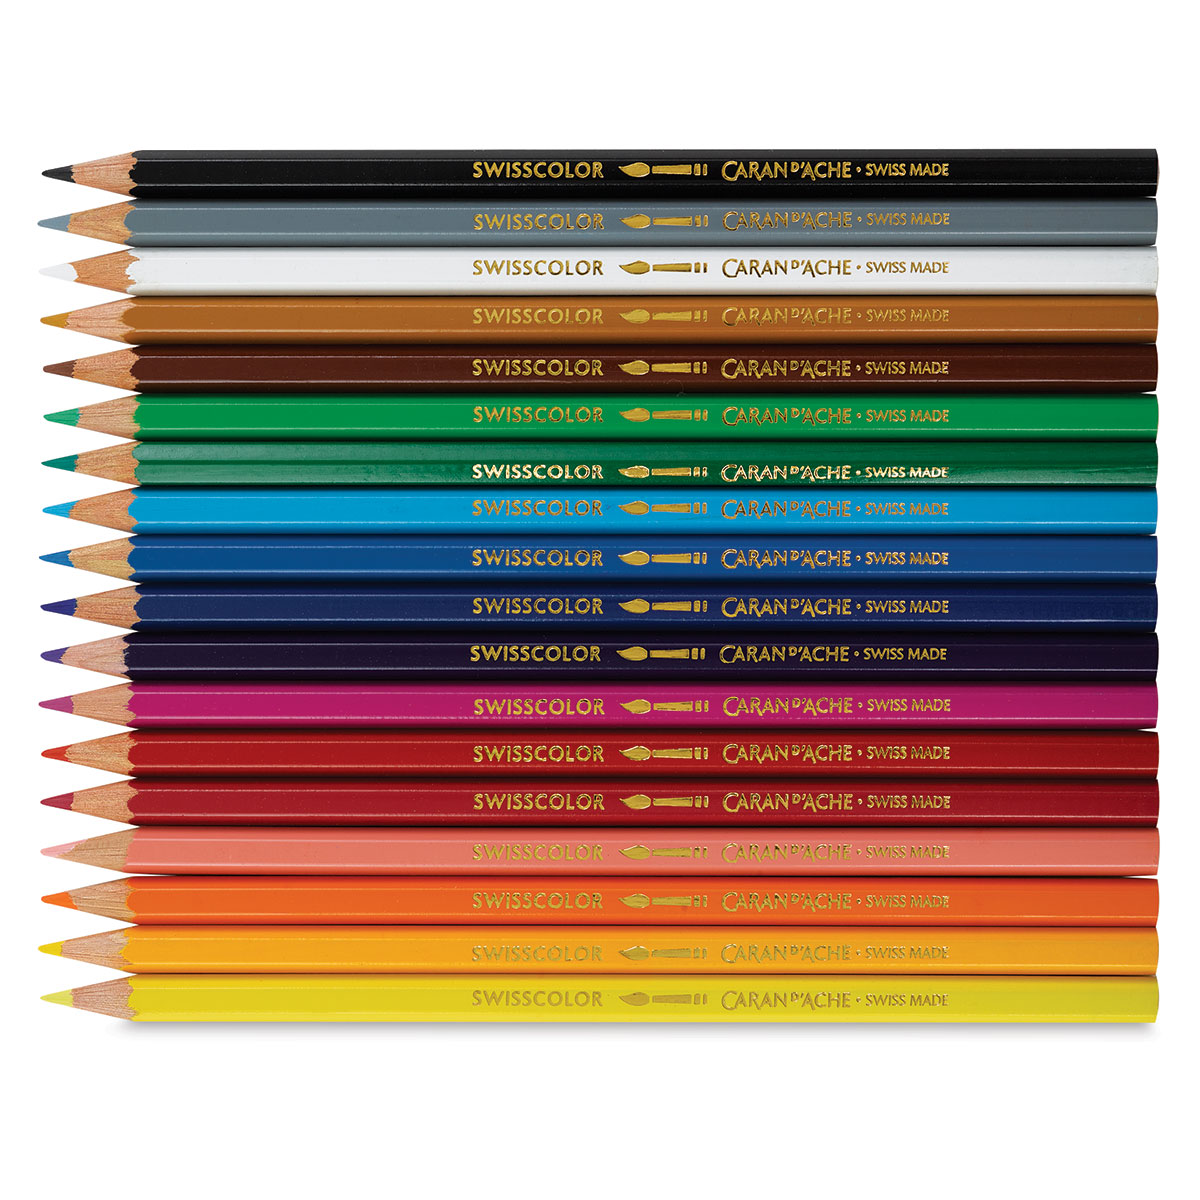 CARAN D'ACHE Wonder Forest Prismaloby 2021 Water Soluble Colored Pencils  NEW